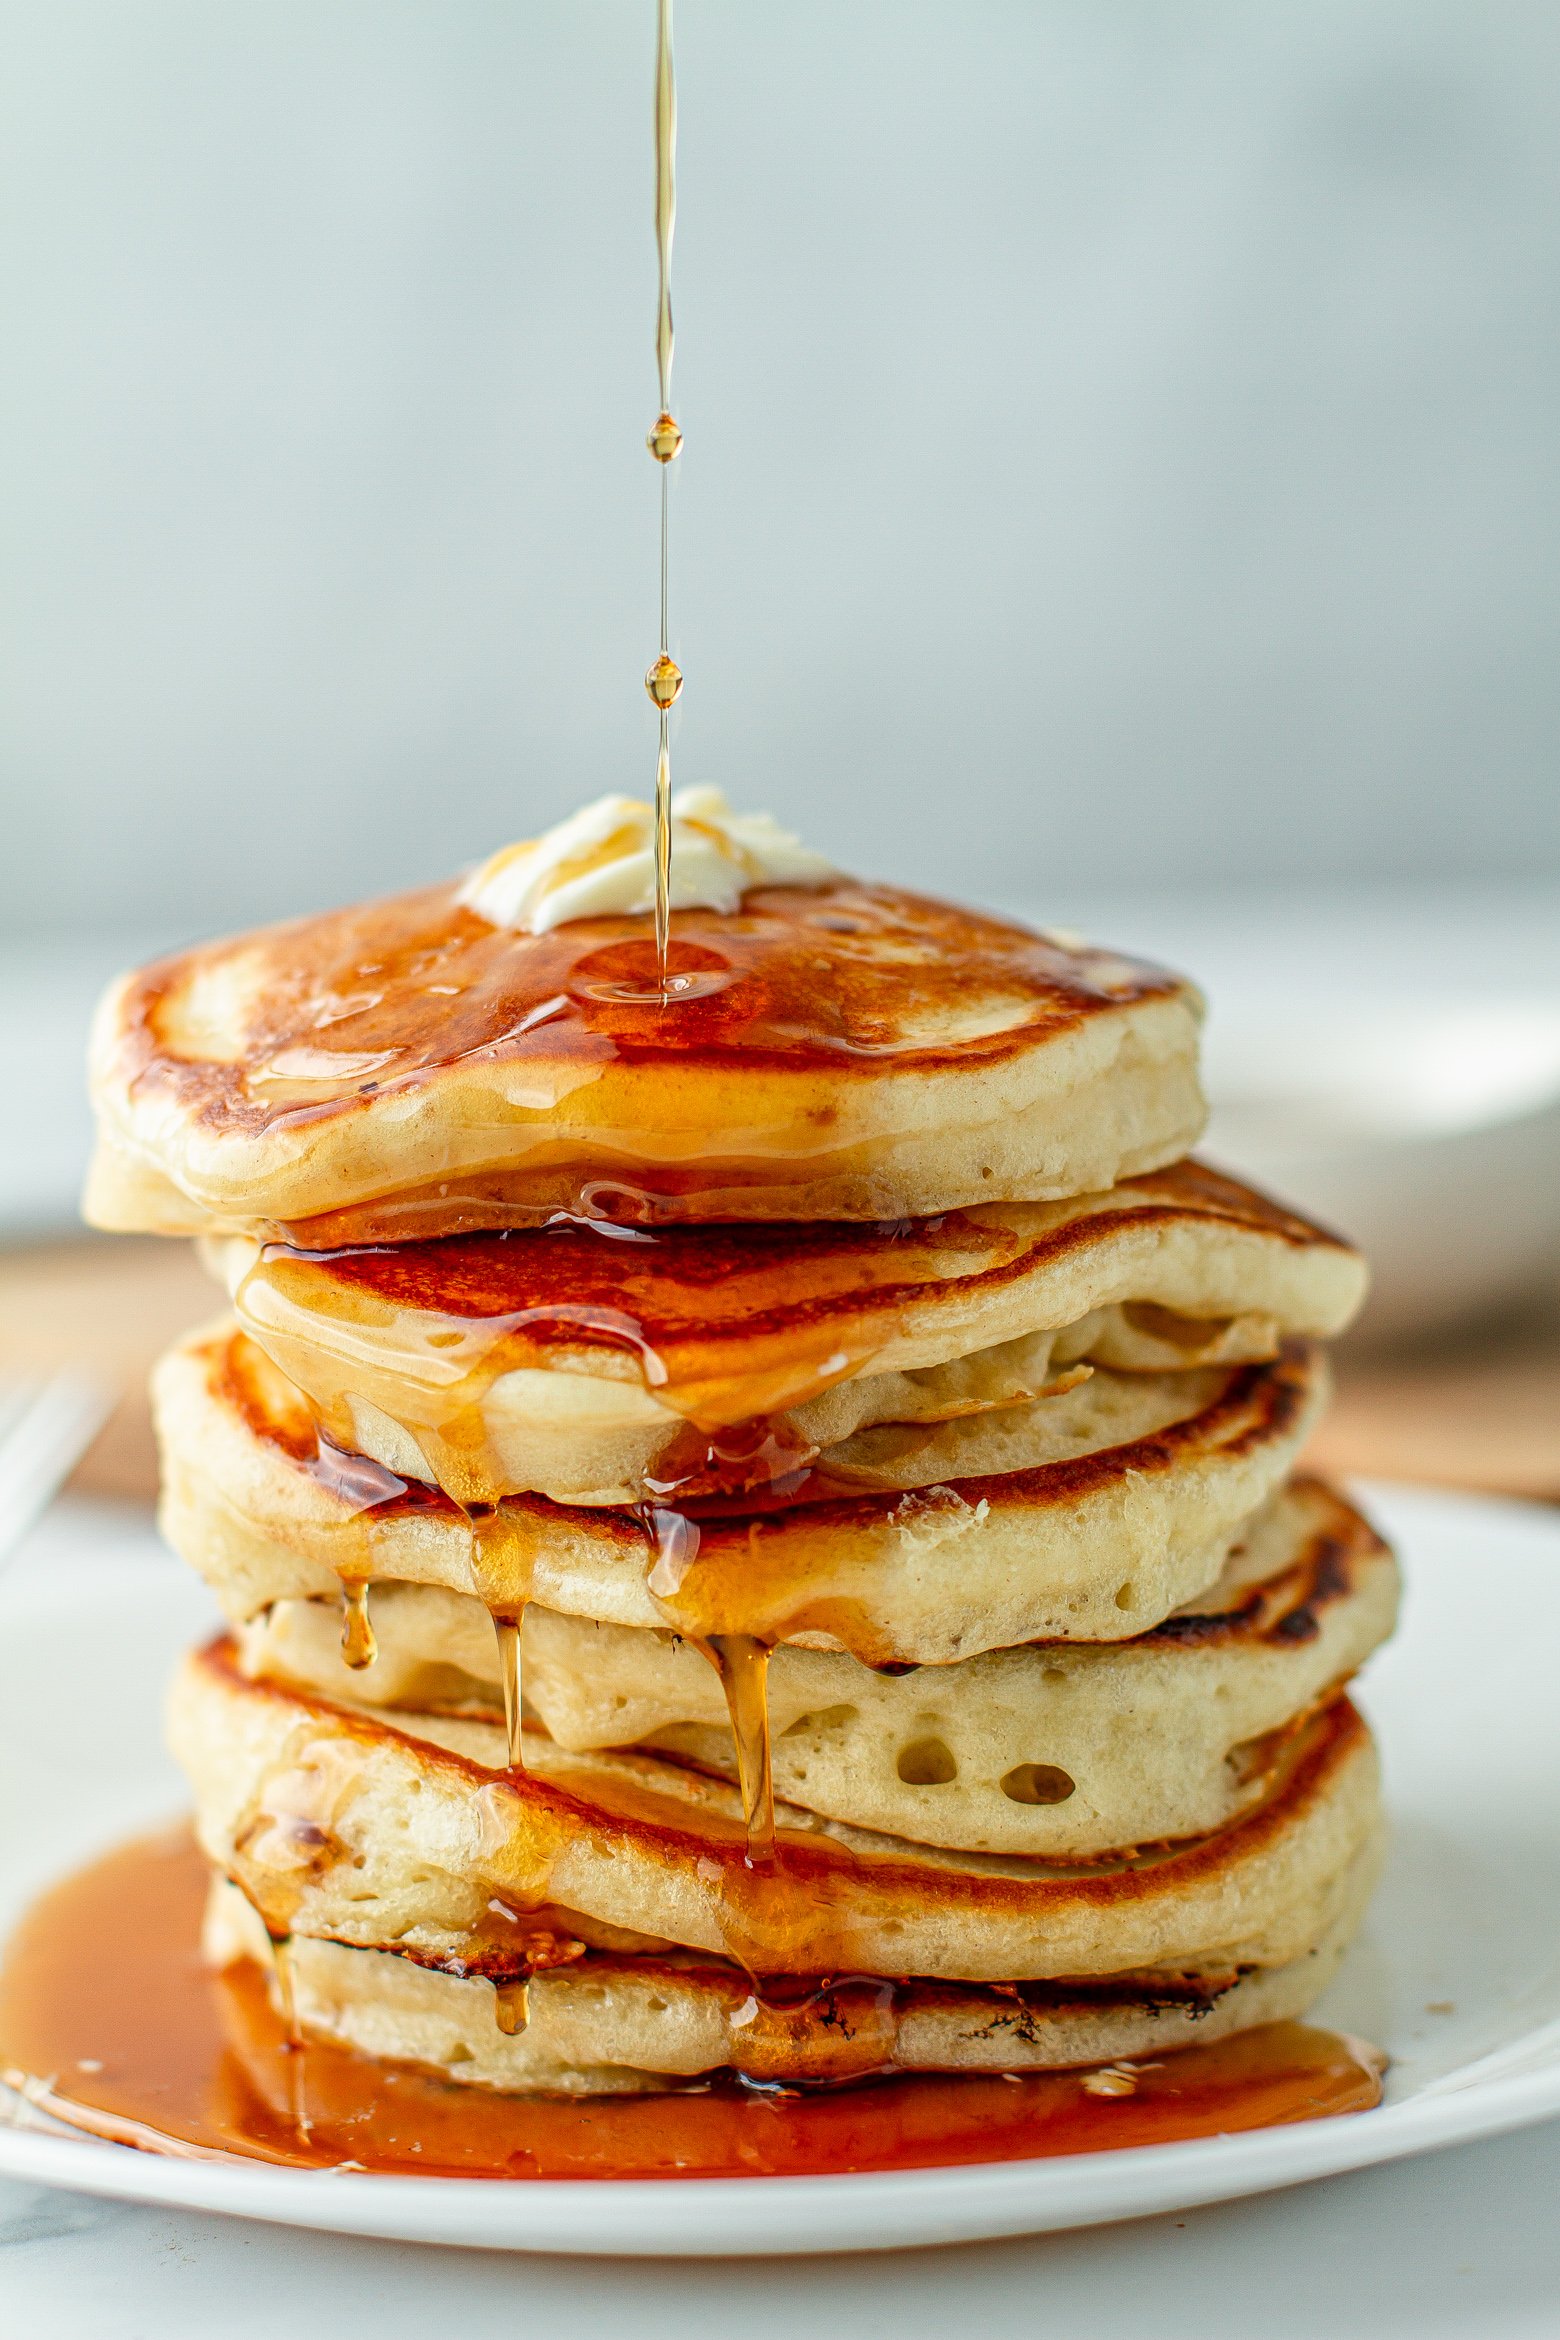 The Best Pancake Turners for 2023